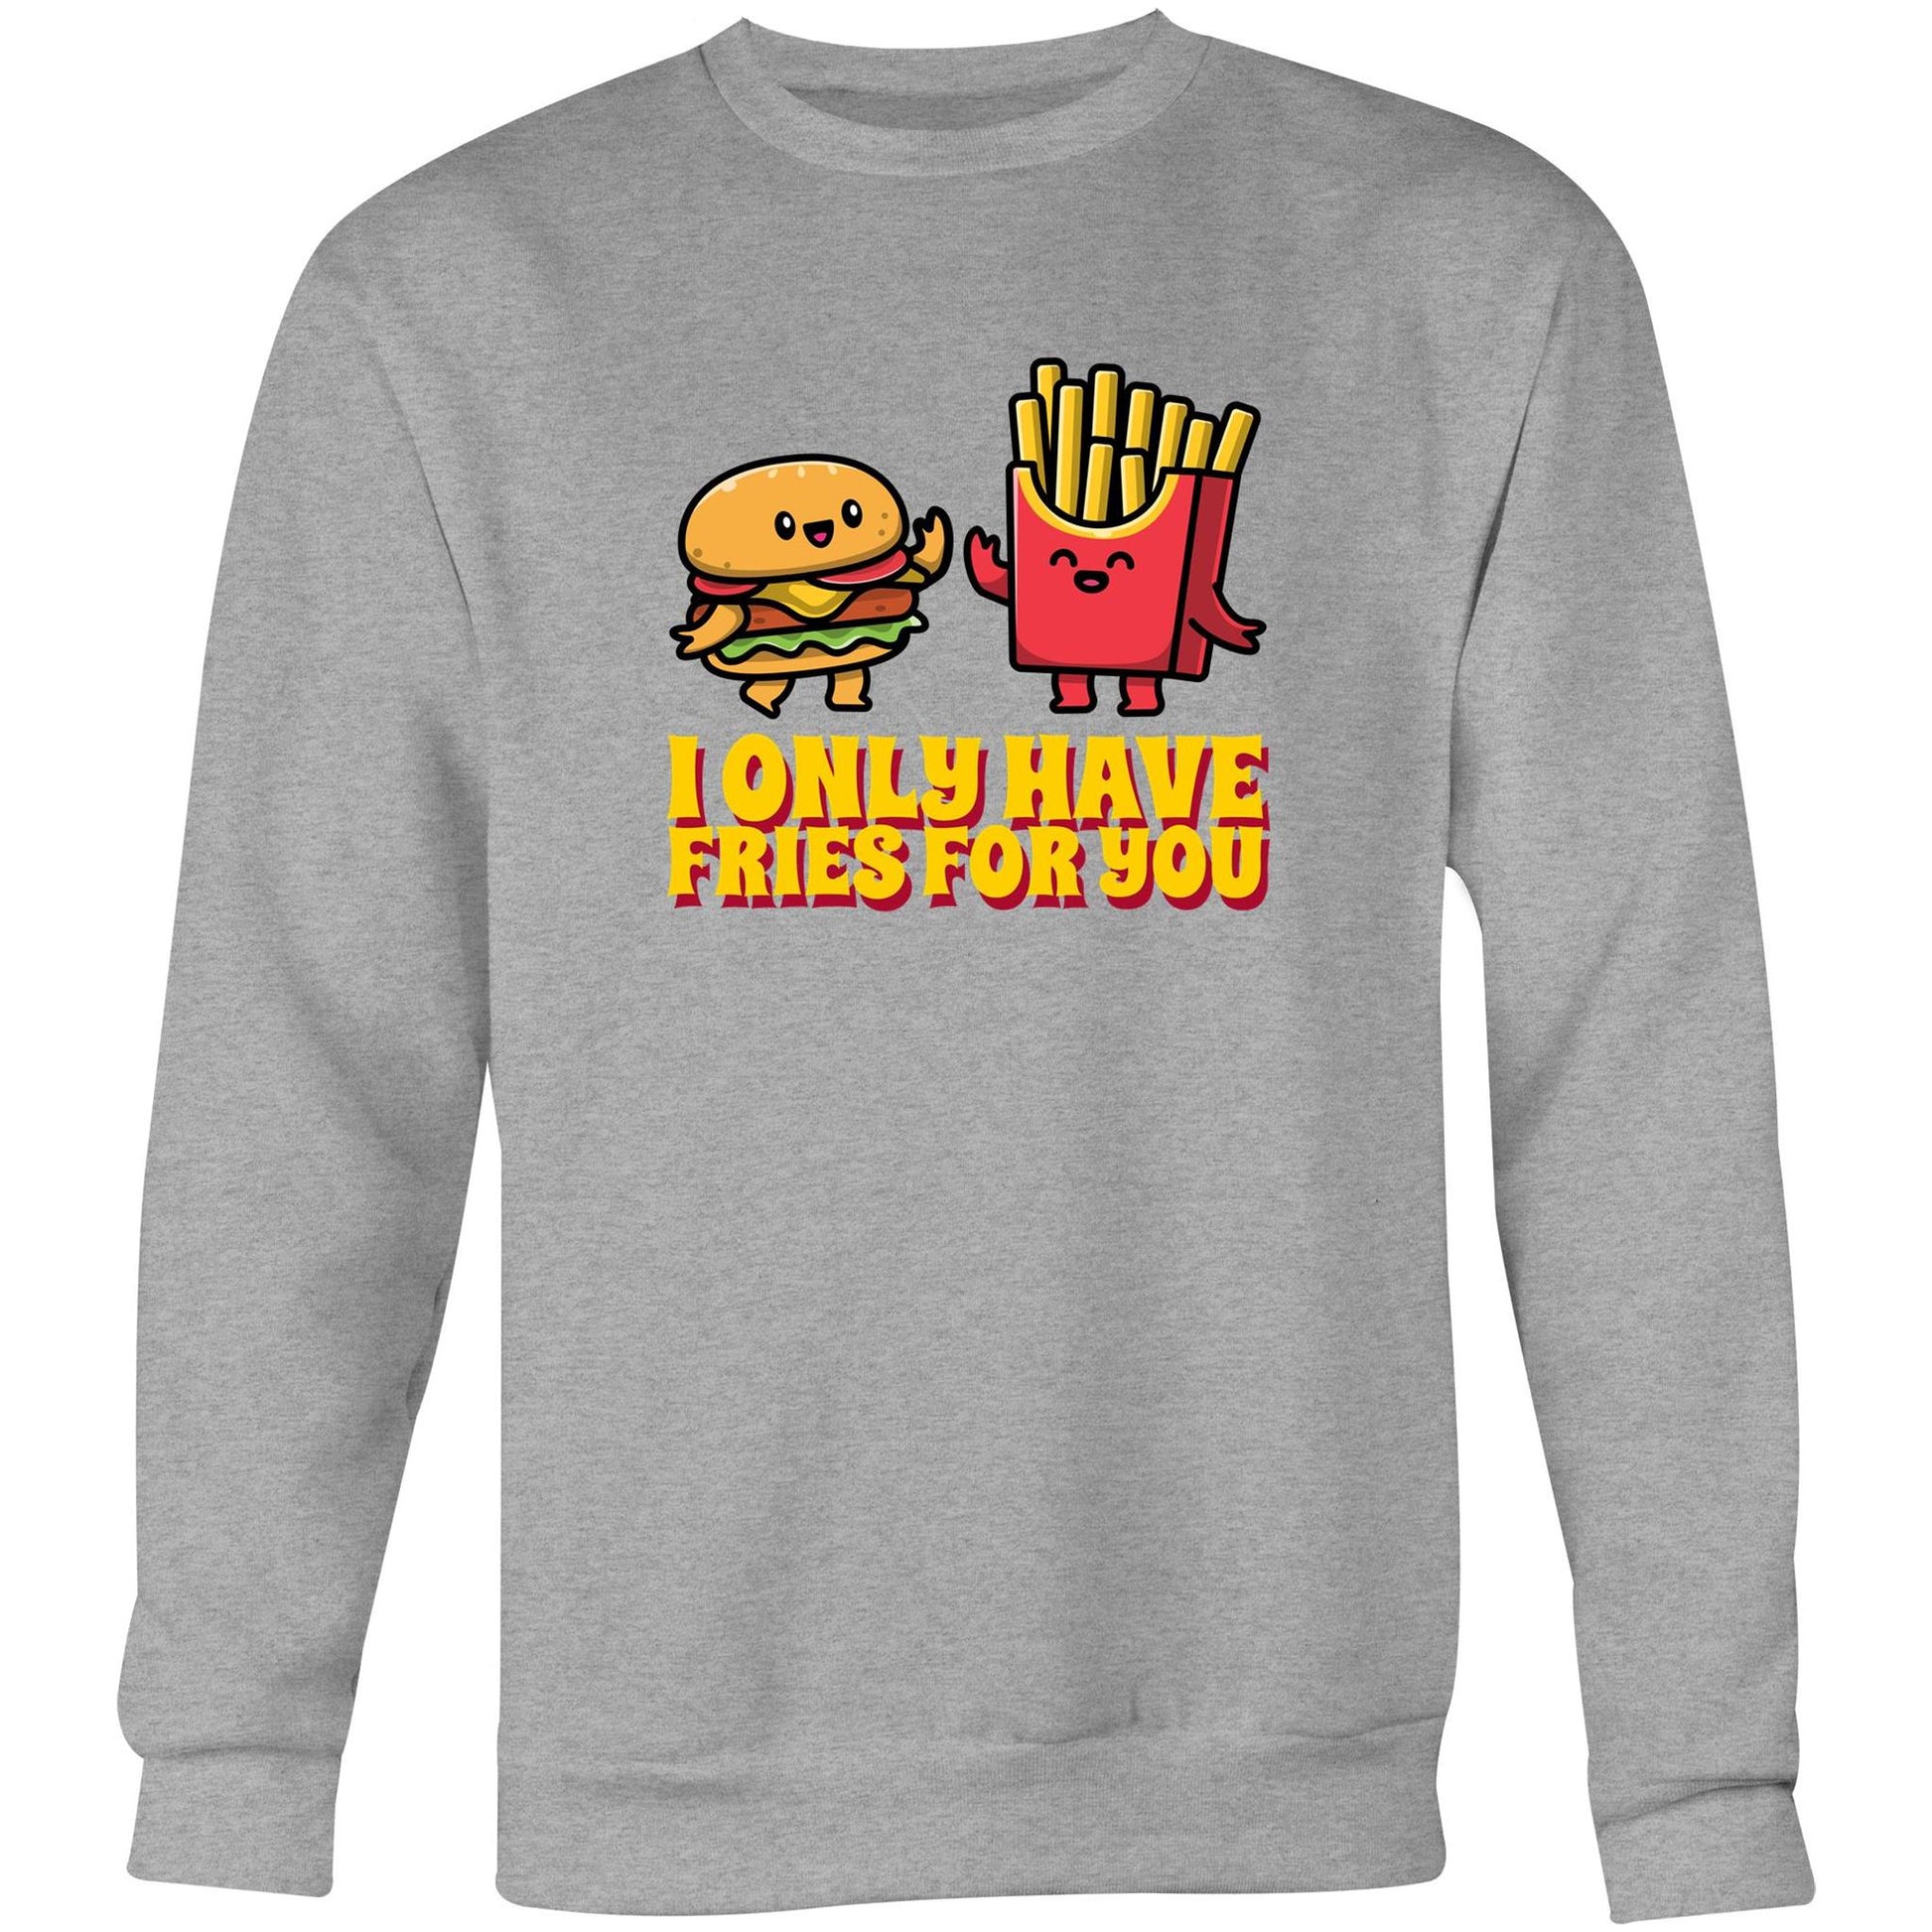 I Only Have Fries For You, Burger And Fries - Crew Sweatshirt Grey Marle Sweatshirt